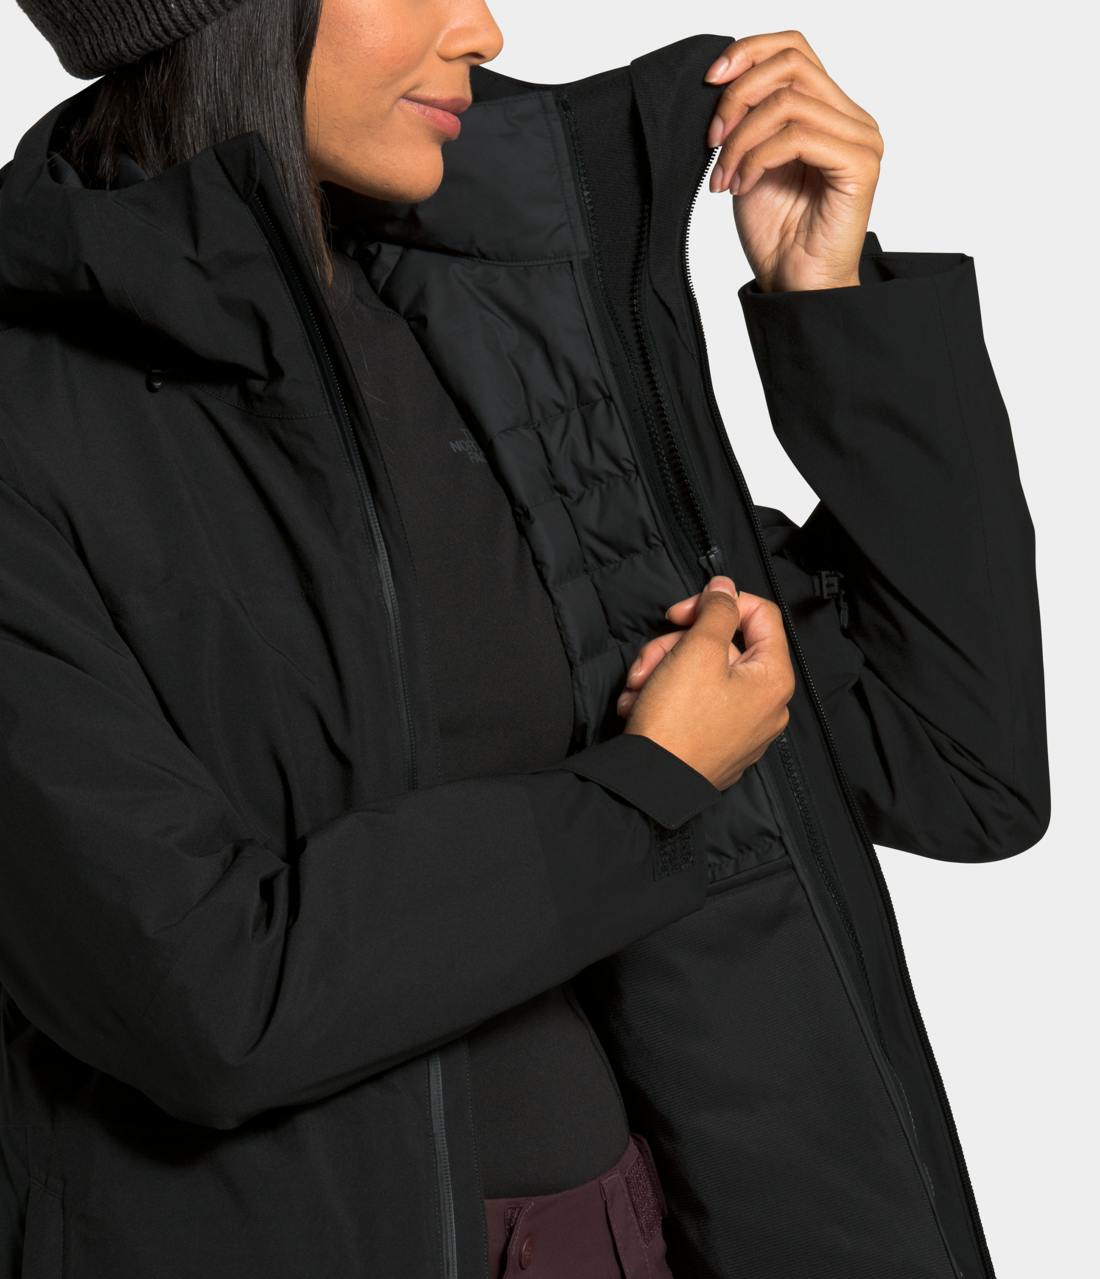 The North Face Women's ThermoBall™ Eco Snow Triclimate® Jacket